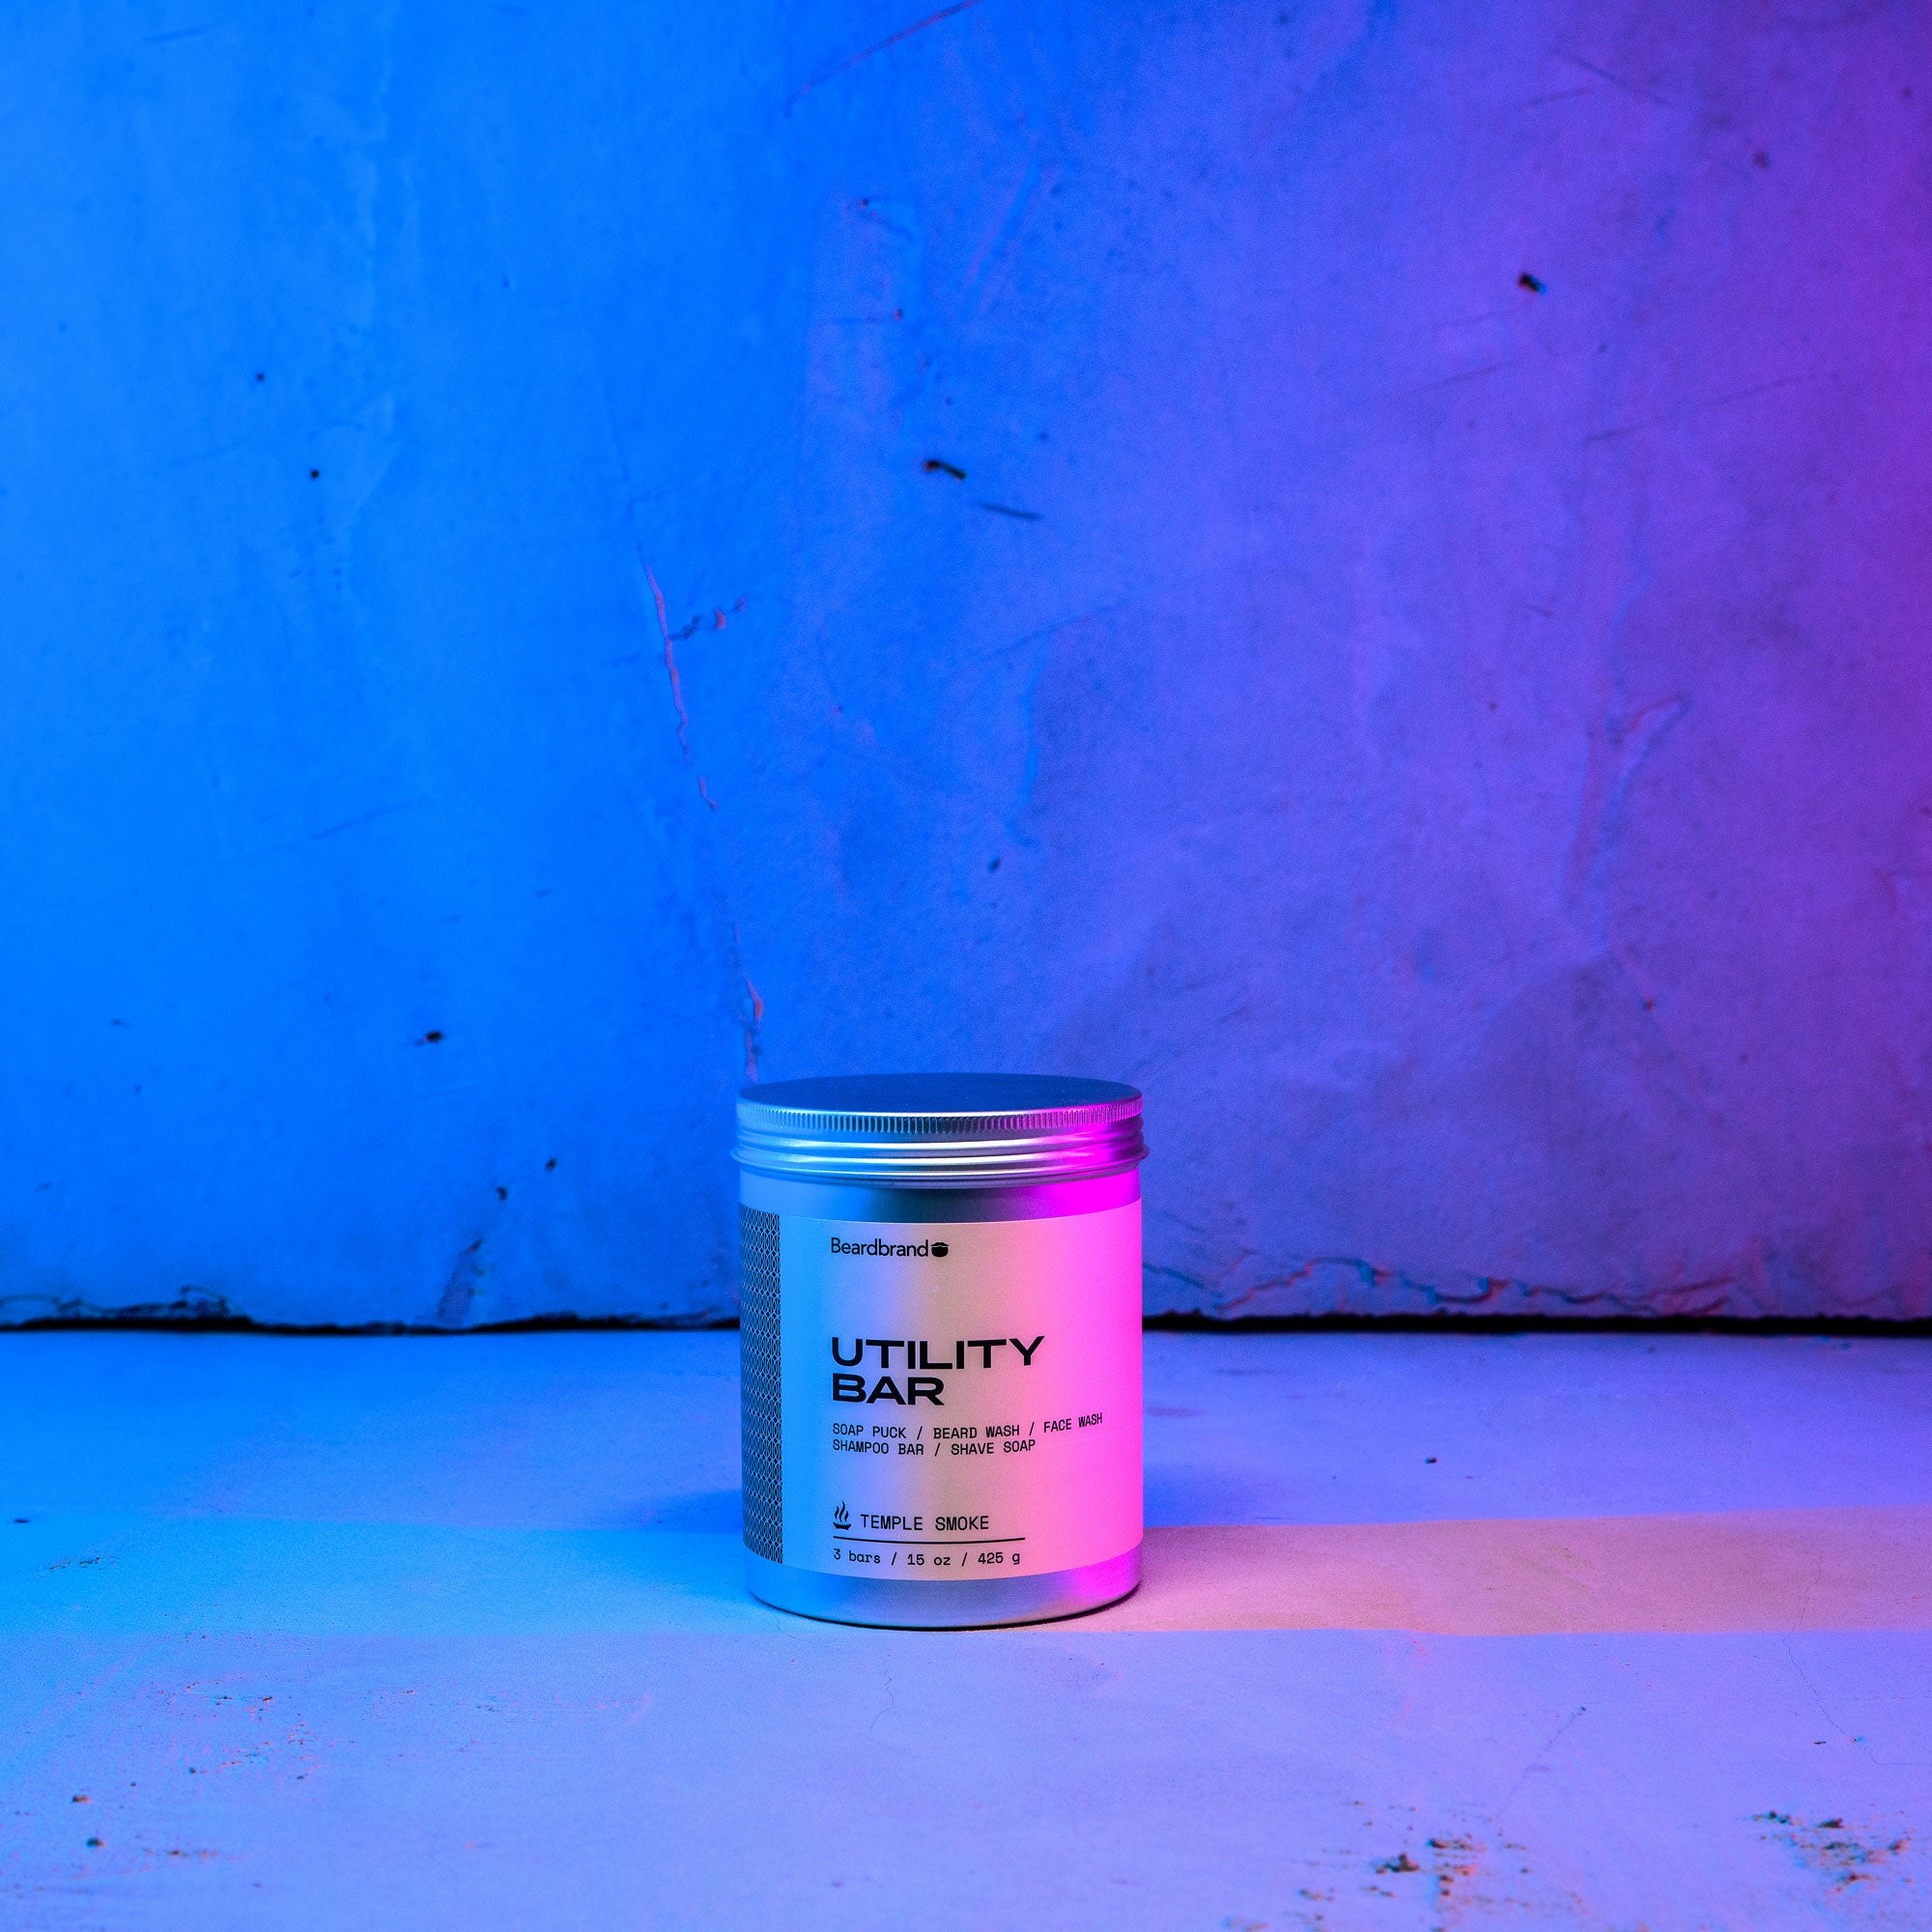 Beardbrand's Utility Bar 3-pack set on a concrete backdrop highlighted in blue and pink lighting with the label facing forward.